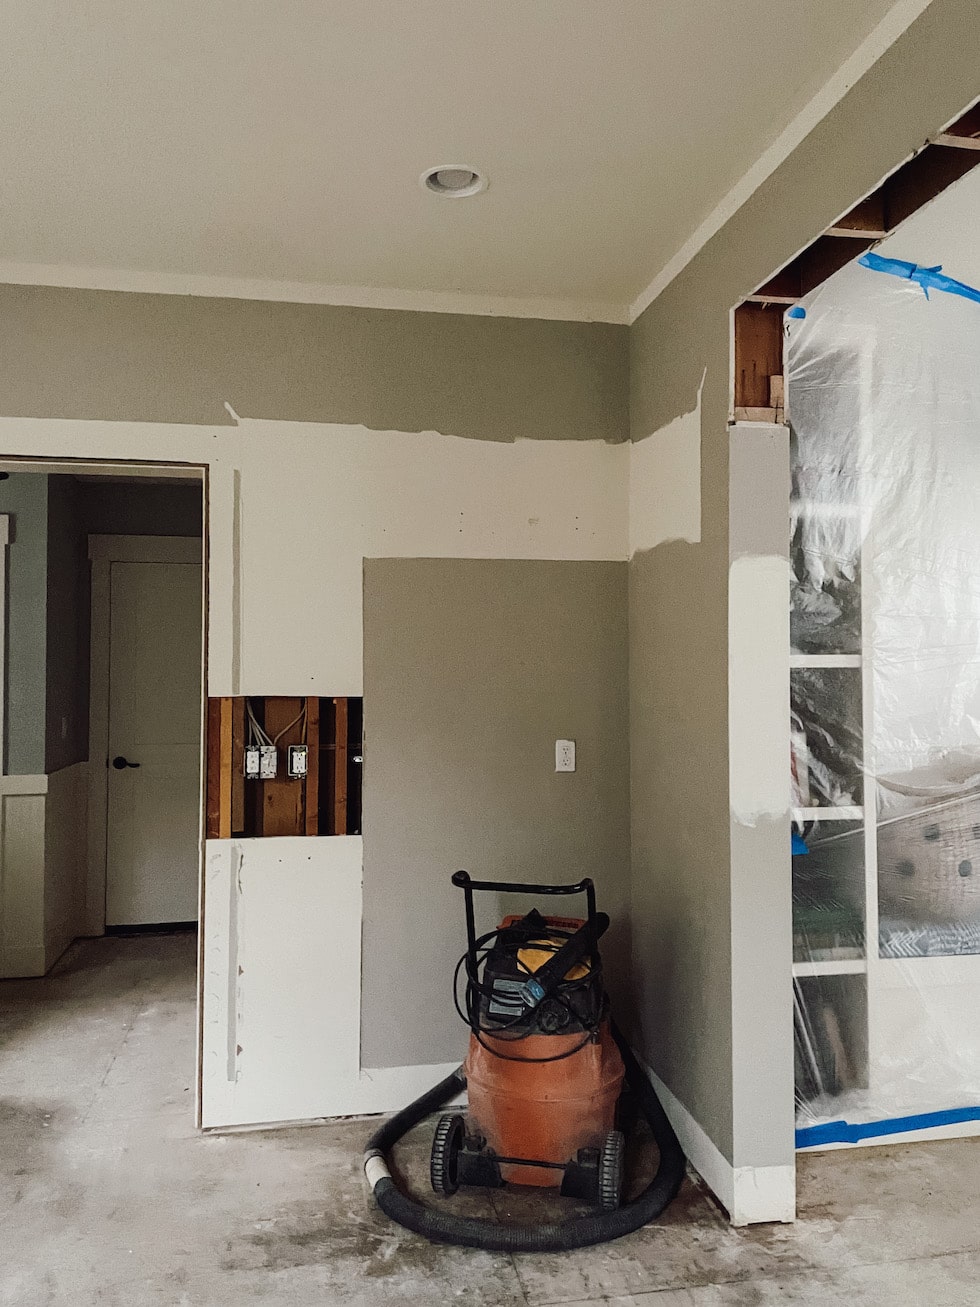 Kitchen and Dining Room Renovation Update! Projects Have Begun!